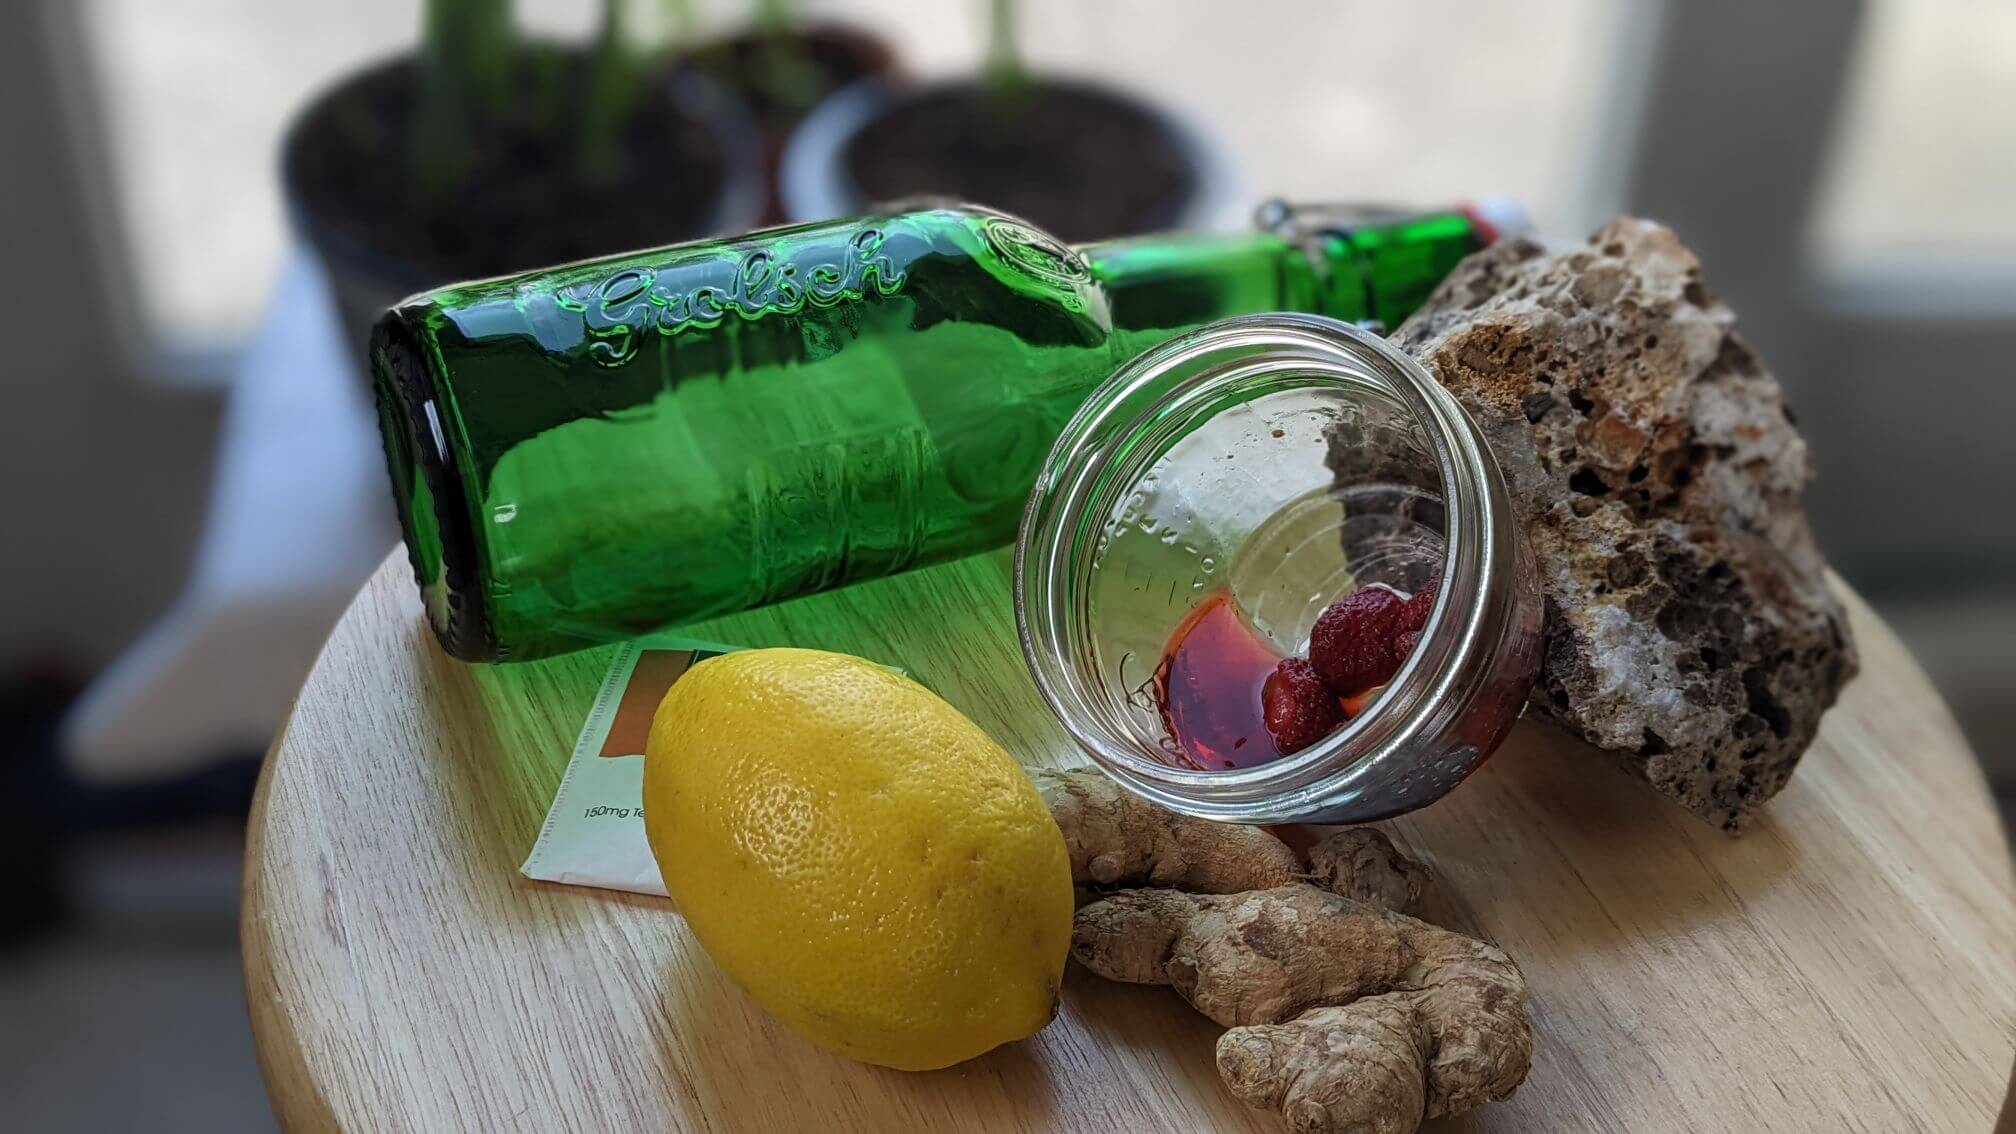 A fresh lemon sits next to thawed strawberries in a shallow dish. A green grolsch bottle sits in the background with a fresh ginger root and a natural stone with small fossilized areas.